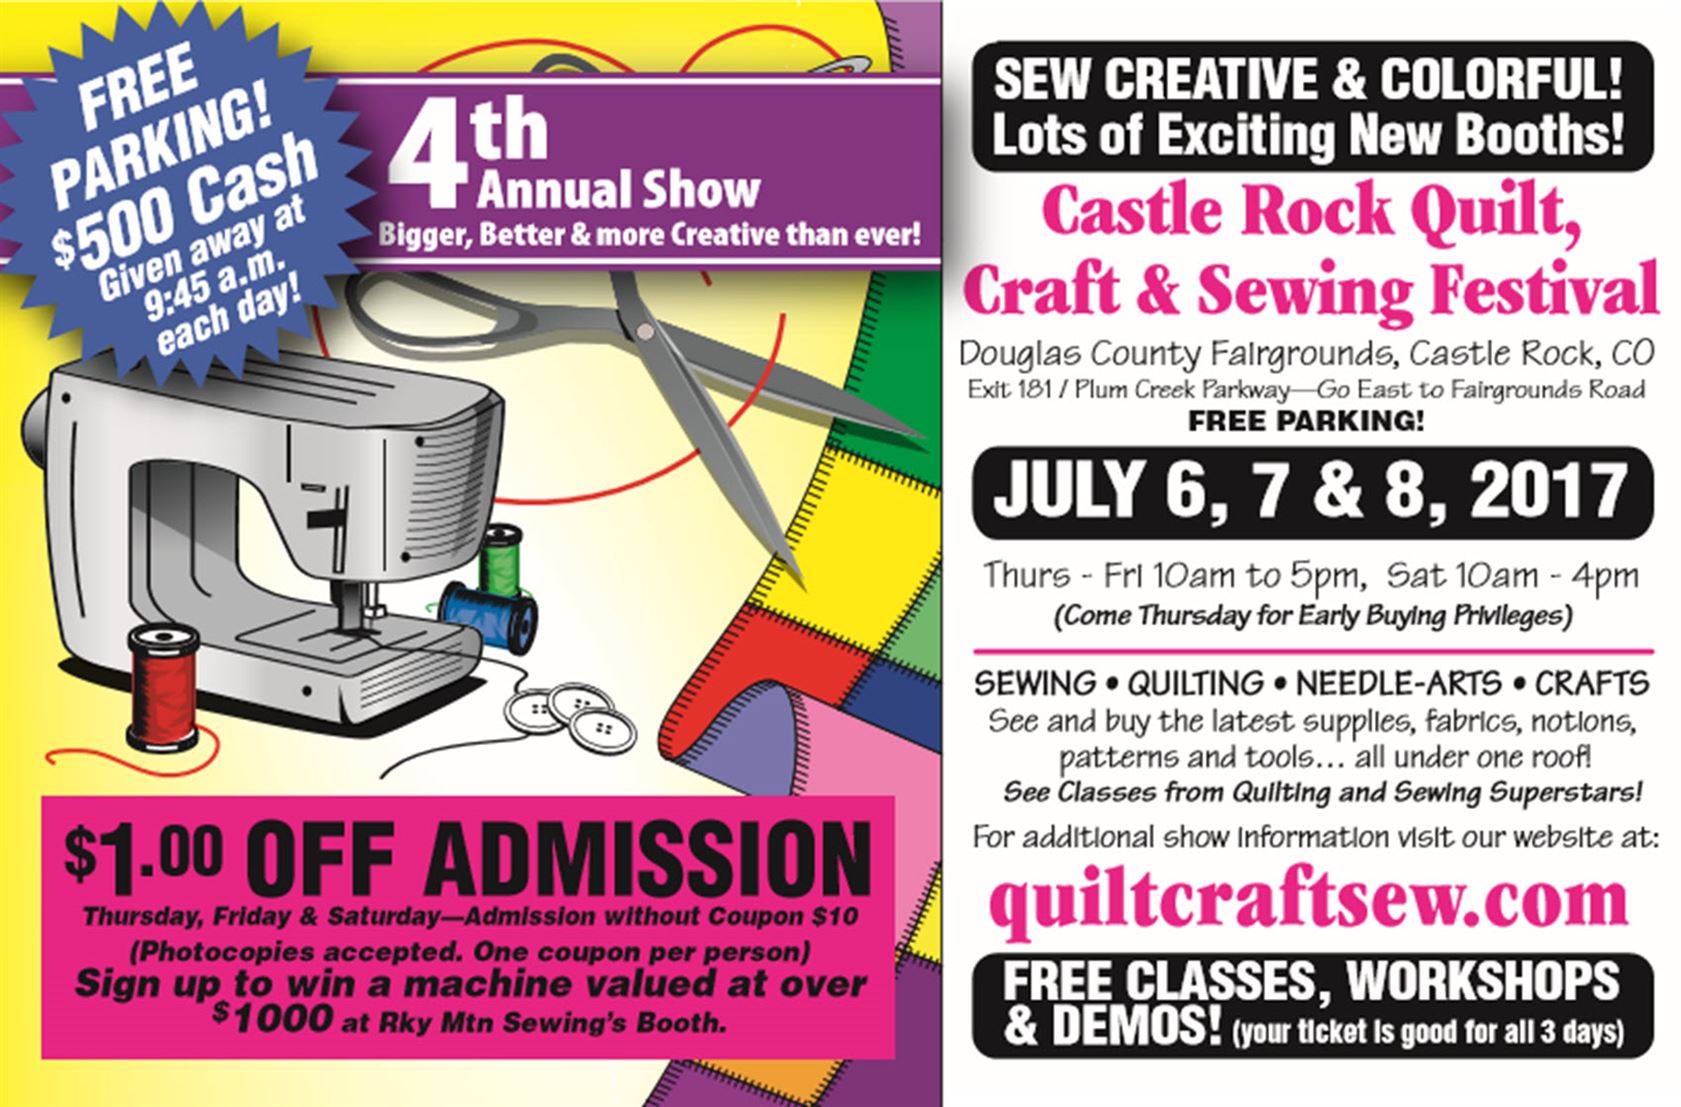 Rocky Mountain Quilt, Craft And Sewing Festival, July 6-8, 2017